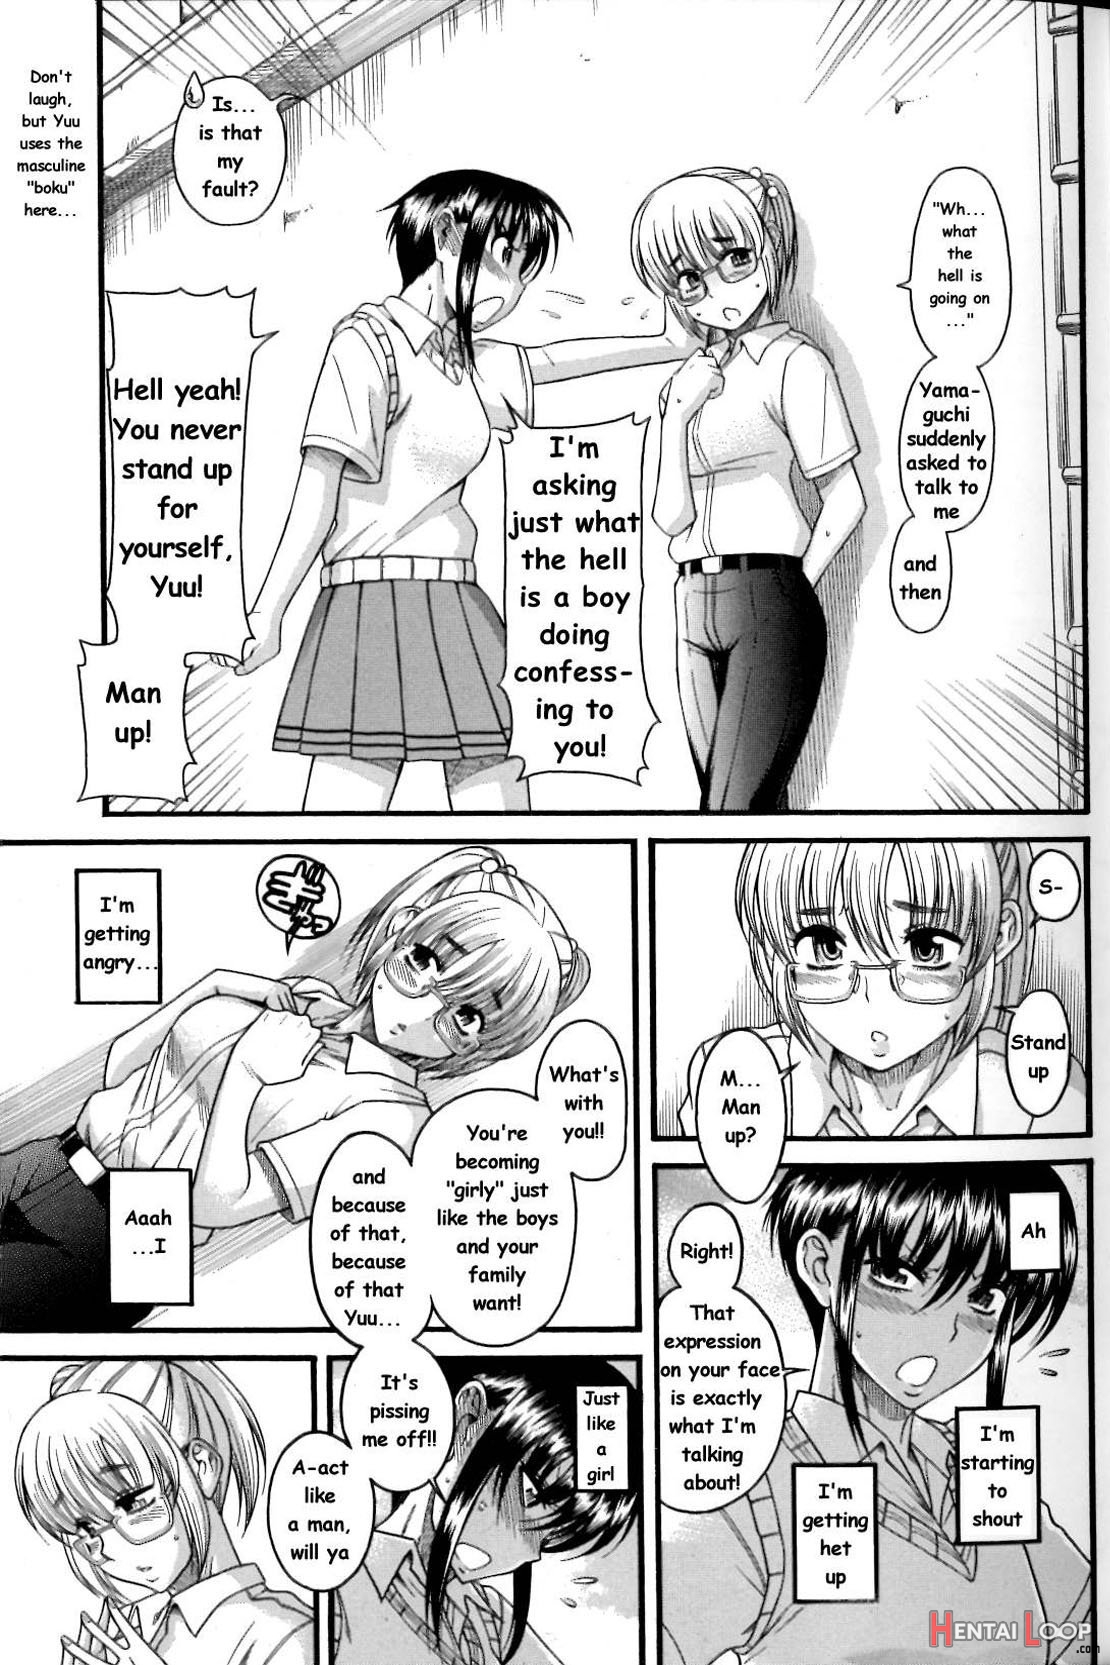 Boy Meets Girl, Girl Meets Boy 2- Single Page Version page 17